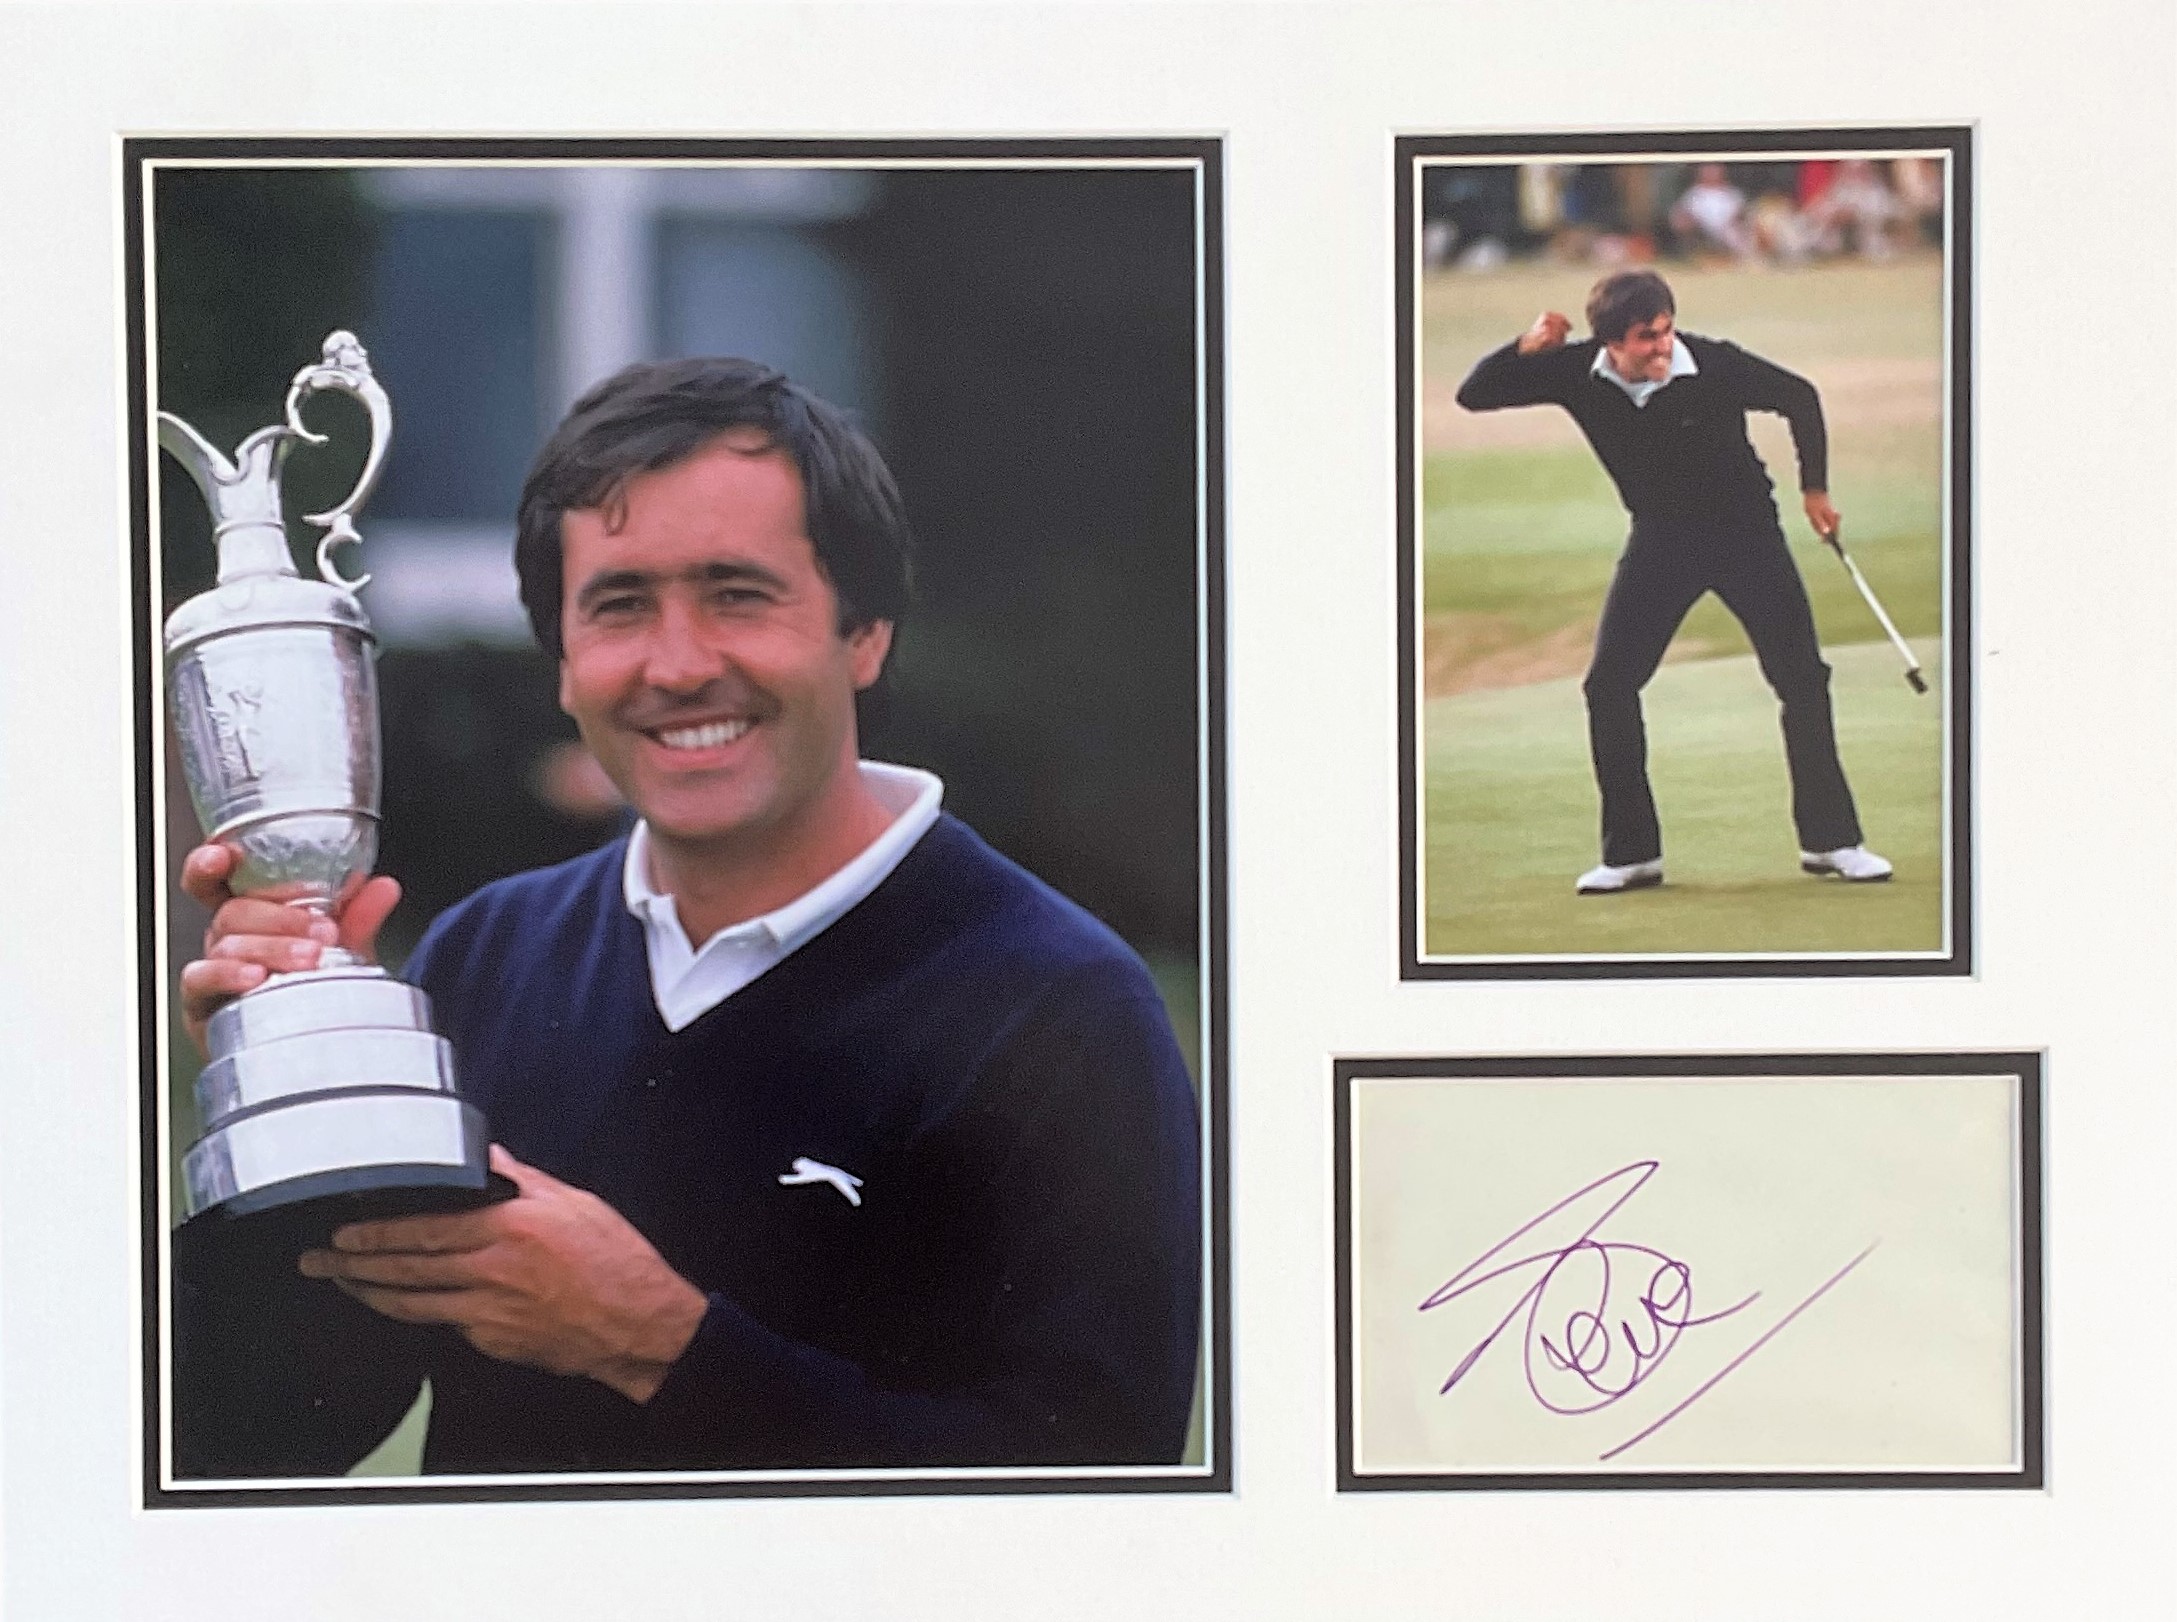 Seve Ballesteros 16x12 overall matted signature piece includes signed album page and two colour